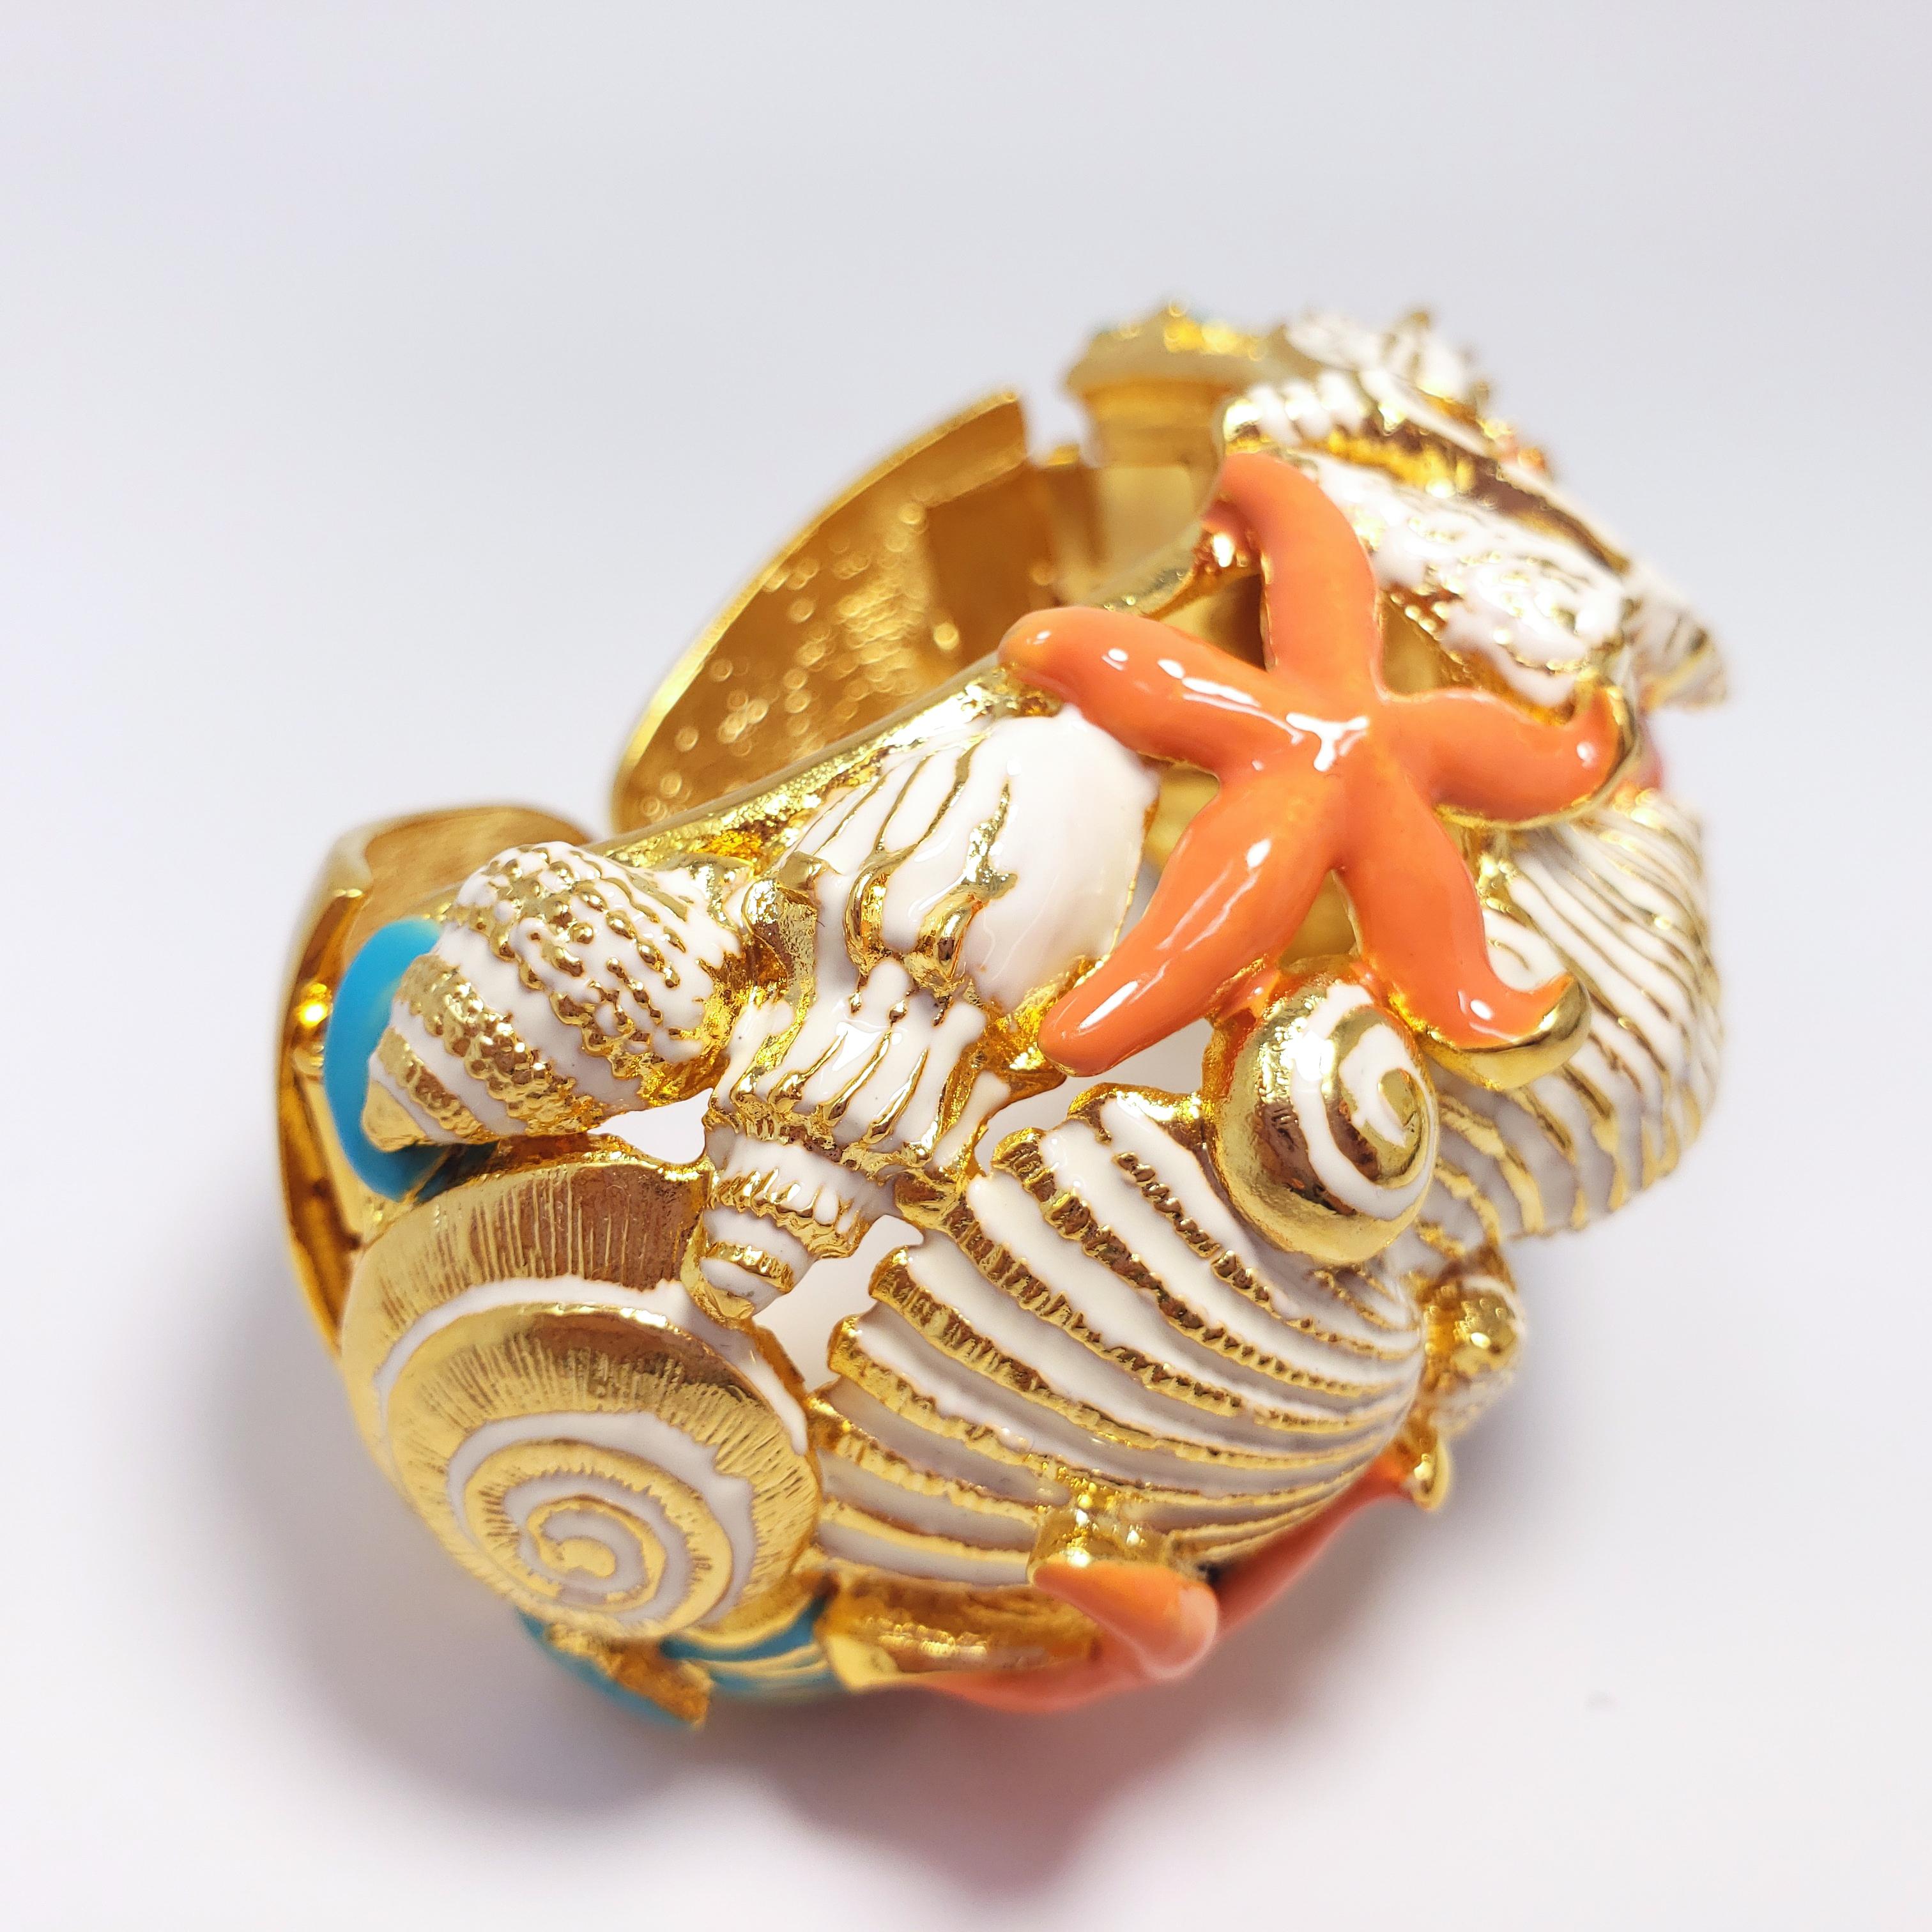 A colorful, nautical-themed cuff bracelet in Kenneth Jay Lane's traditional whimsical style. Features shells and starfish painted with white, turquoise, and coral enamel. Set in 22K gold plated, double hinged cuff.

Dimensions: 16 cm inner